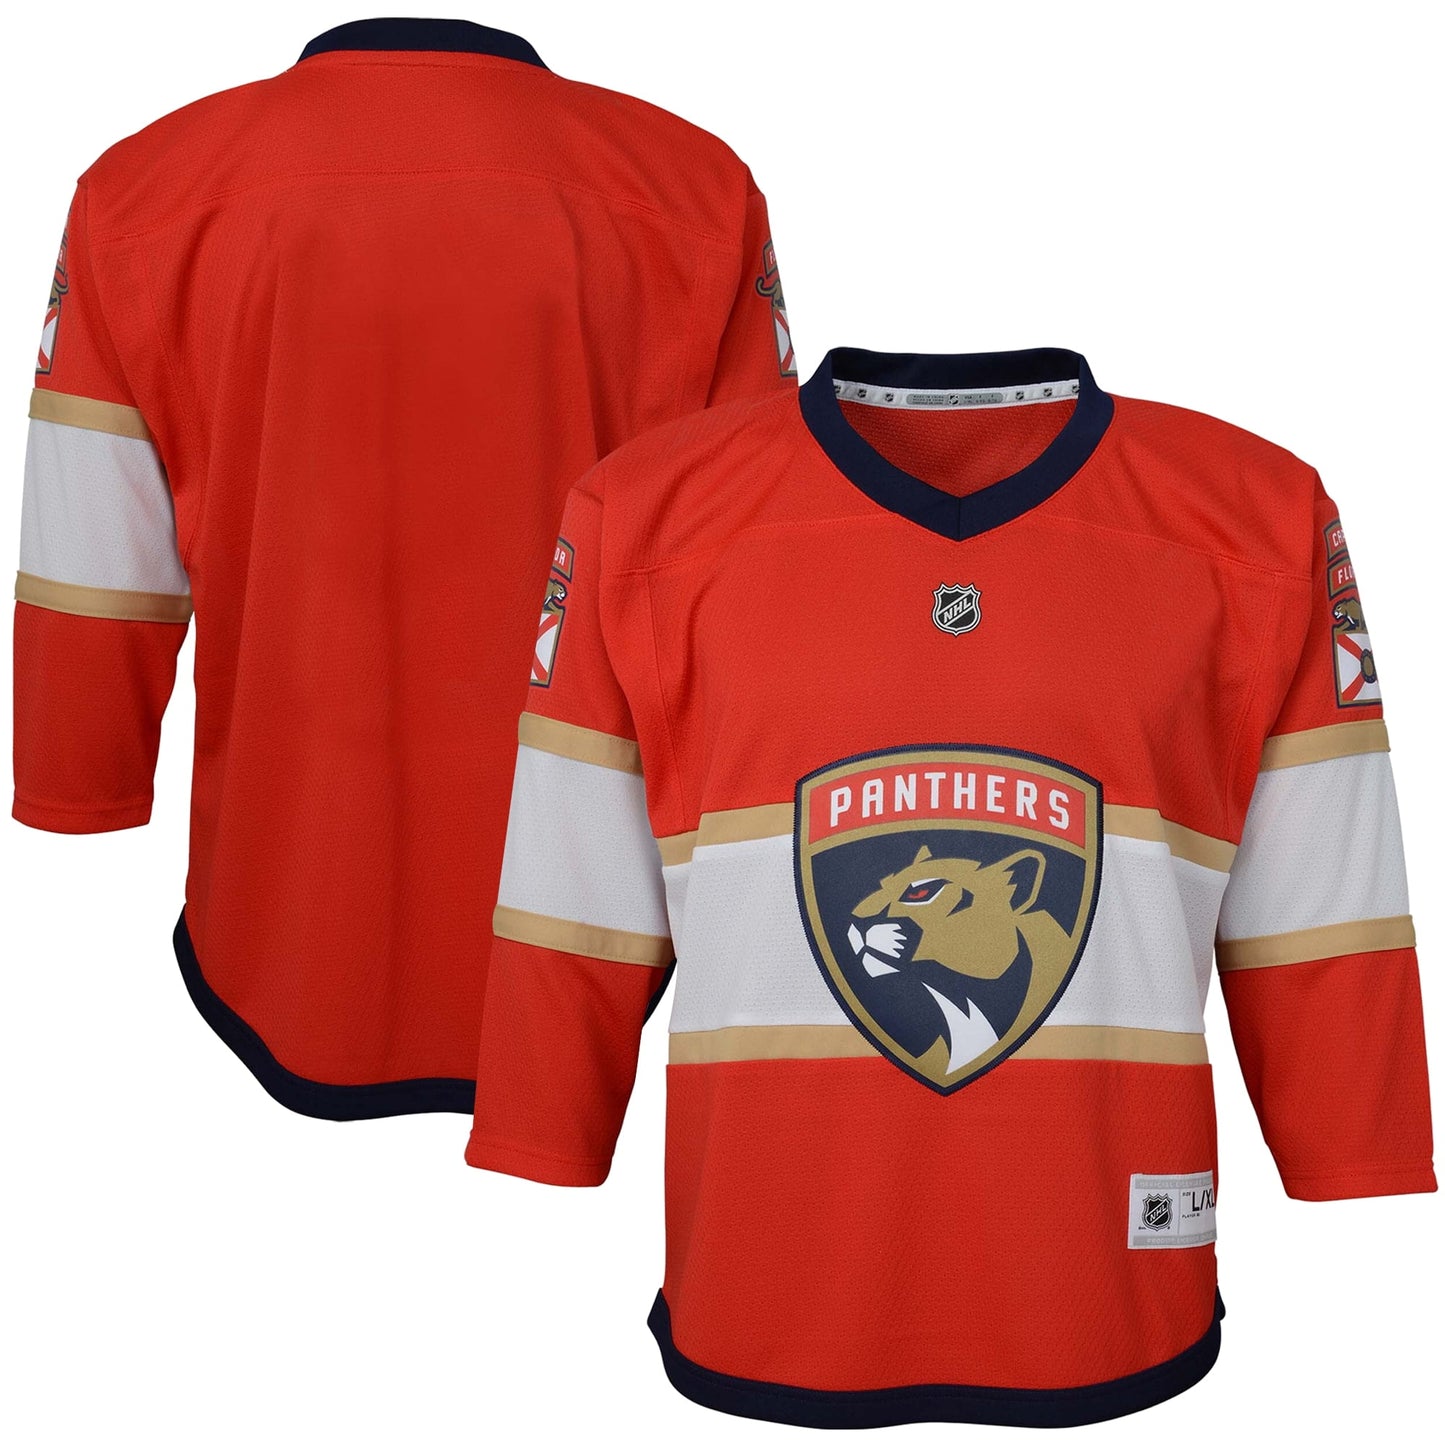 Youth Red Florida Panthers Home Replica Blank Jersey